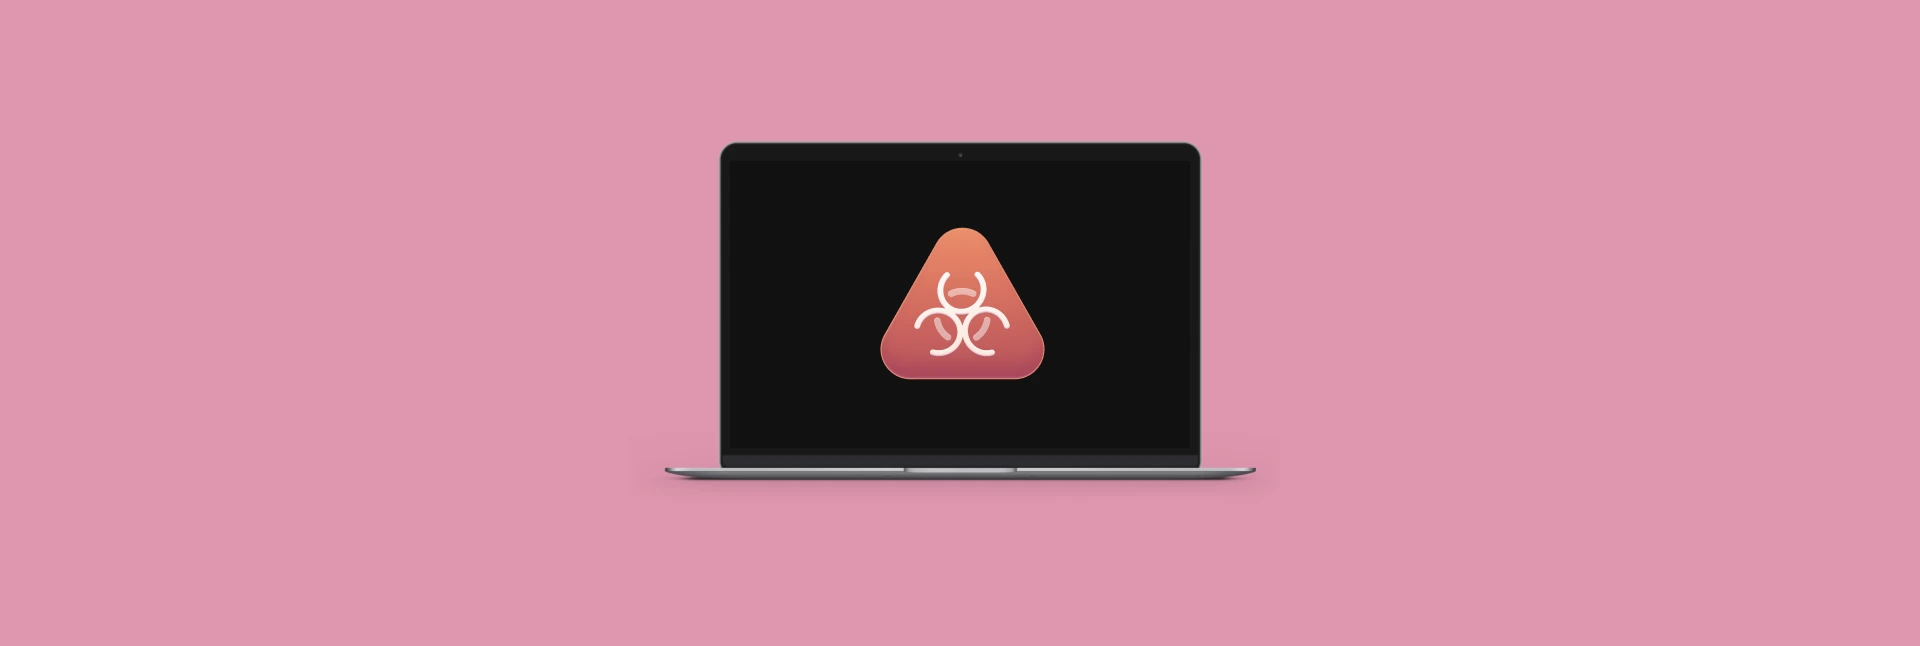 Your computer is low on memory” Mac virus removal - MacSecurity